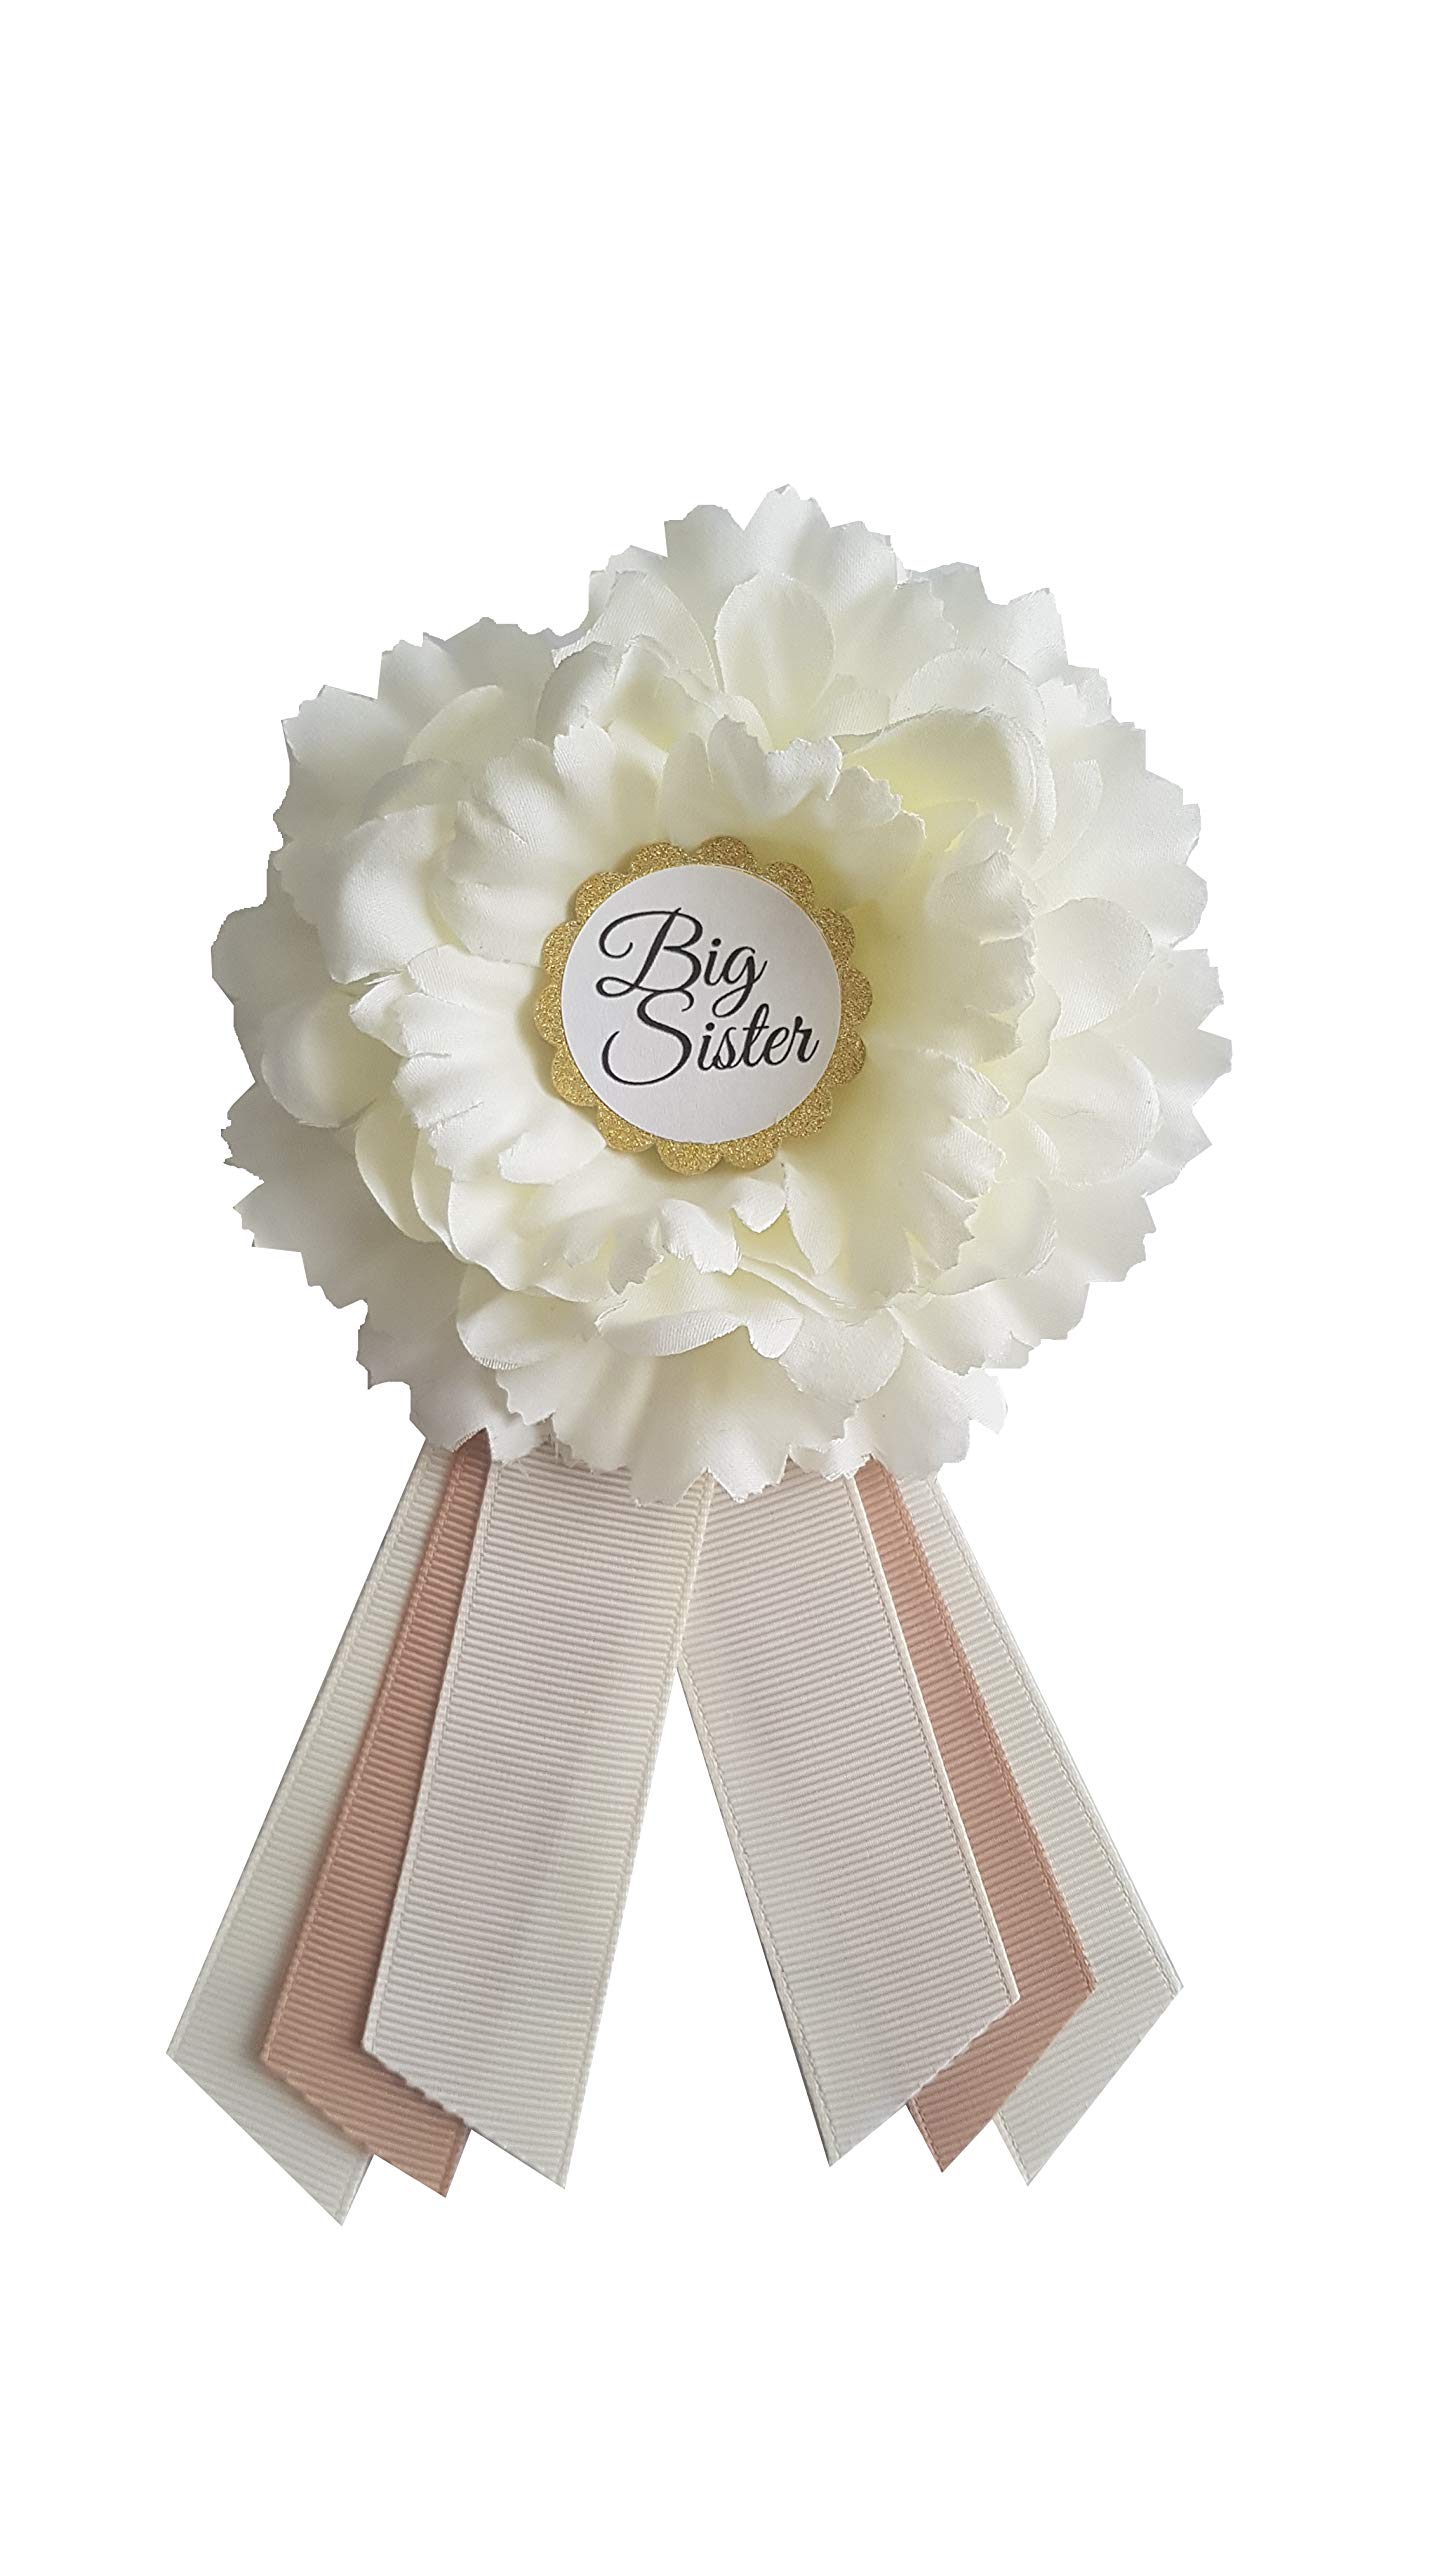 Mom To Be Sash and Dad To Be Pin By LMC | Baby Shower Belly Sash and Corsage | USA Handmade | Heat Sealed Ends | Ivory and Beige (Big Sister pin)